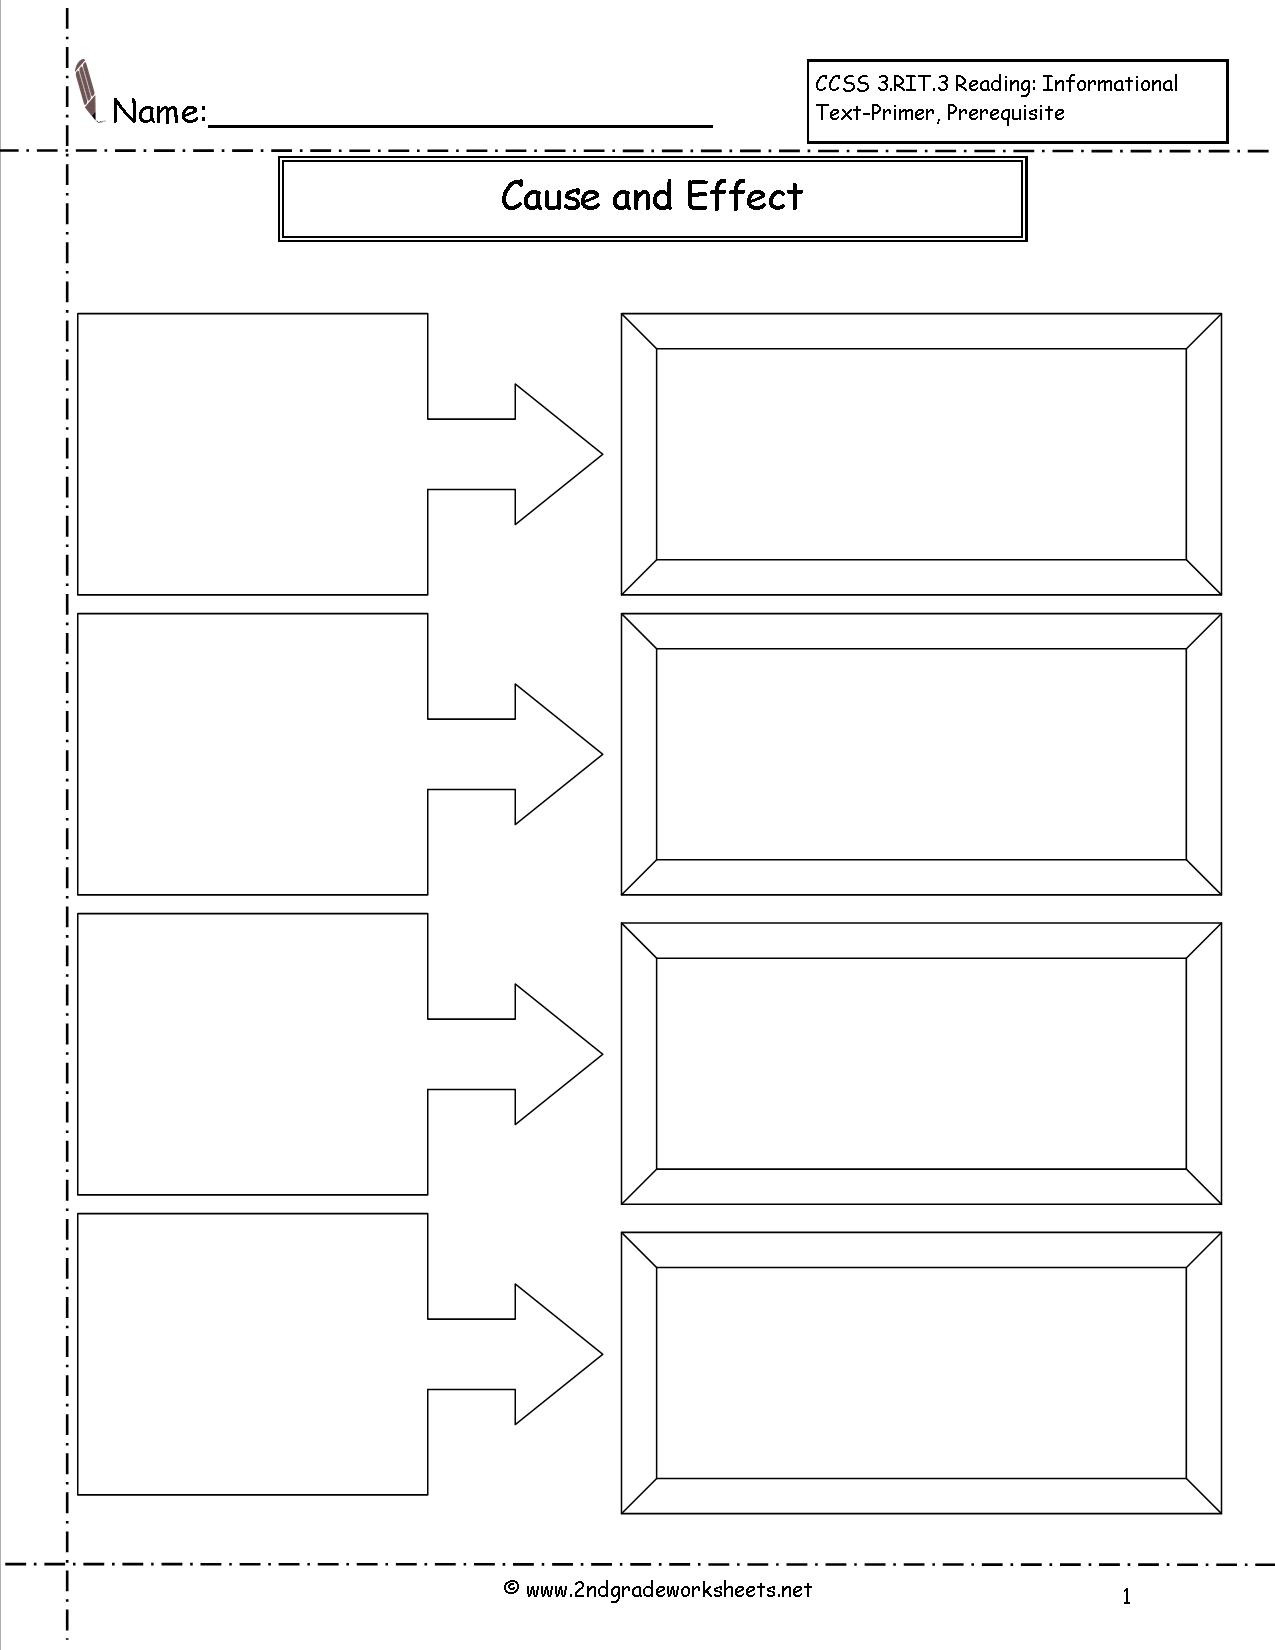 Cause And Effect Worksheets Db excel